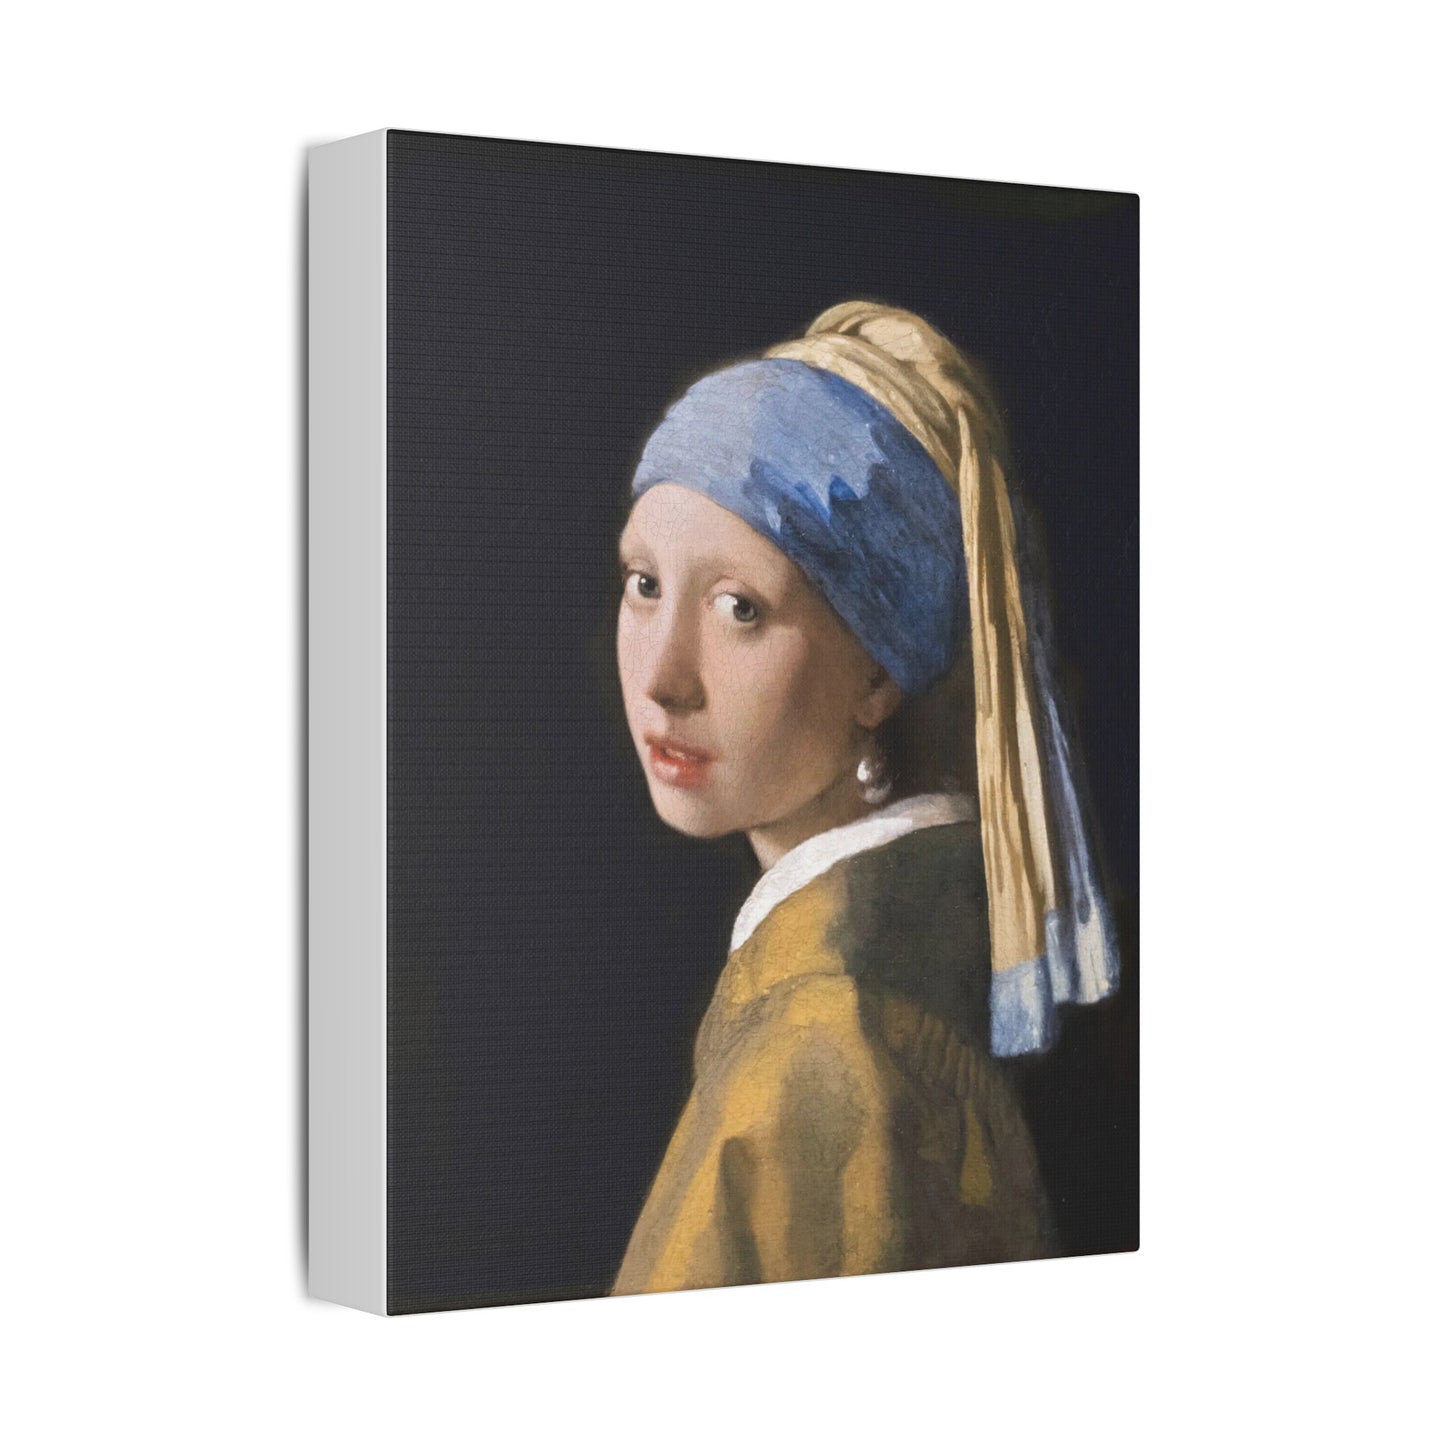 Johannes Vermeer "Girl with a Pearl Earring"